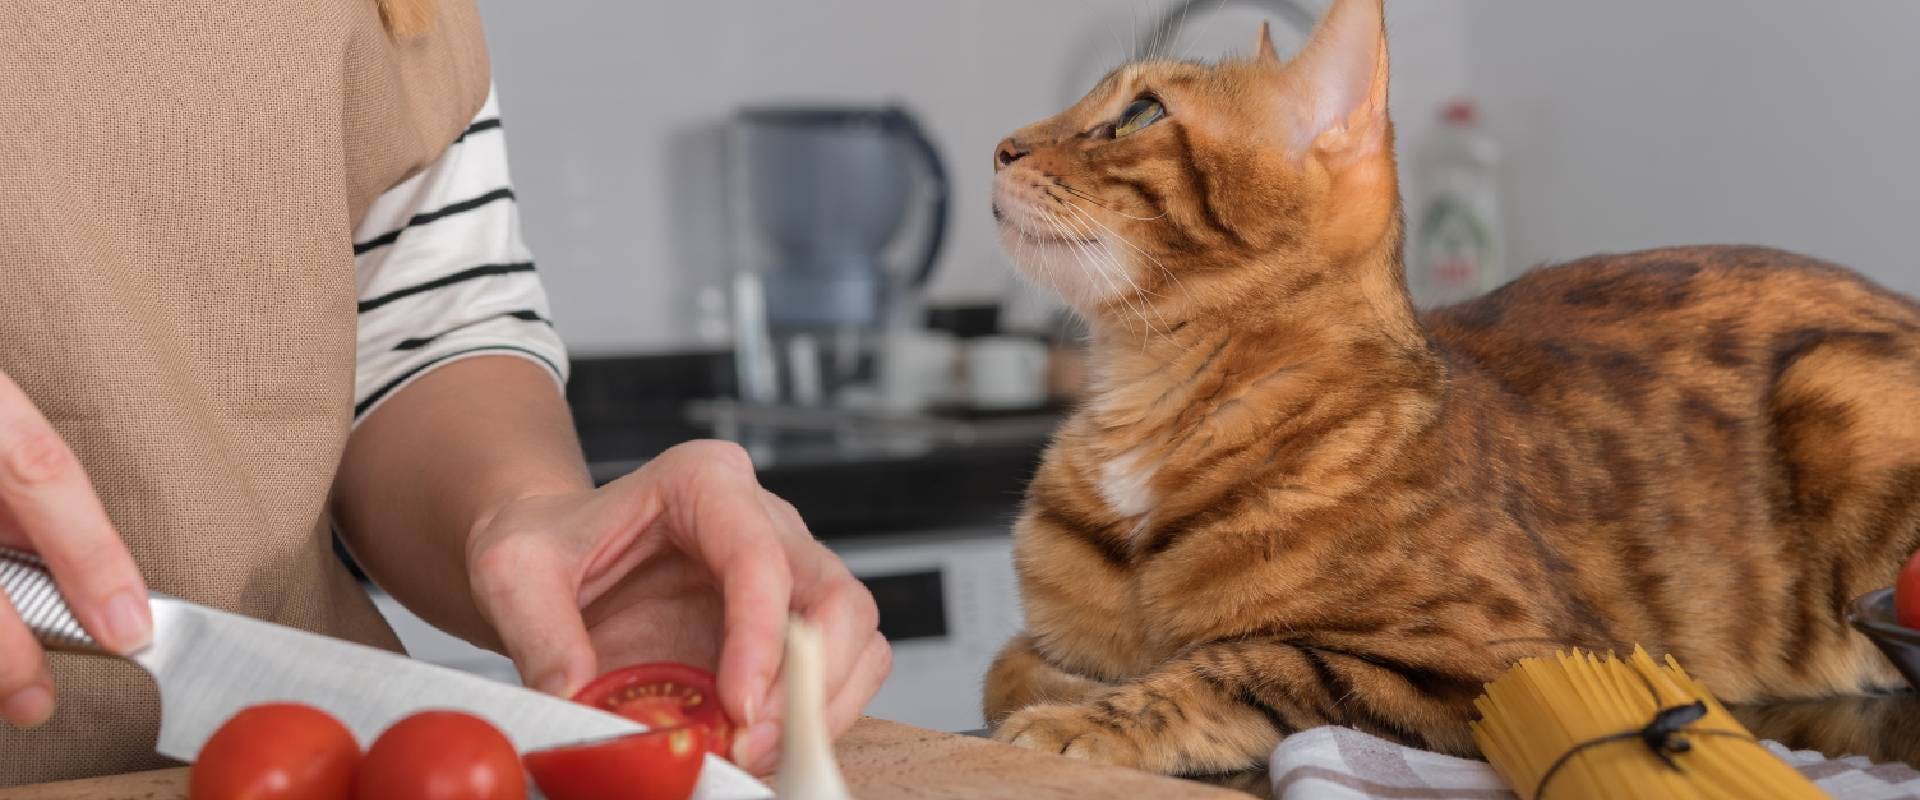 Cat sitting on kitchen side while person cuts tomatoes